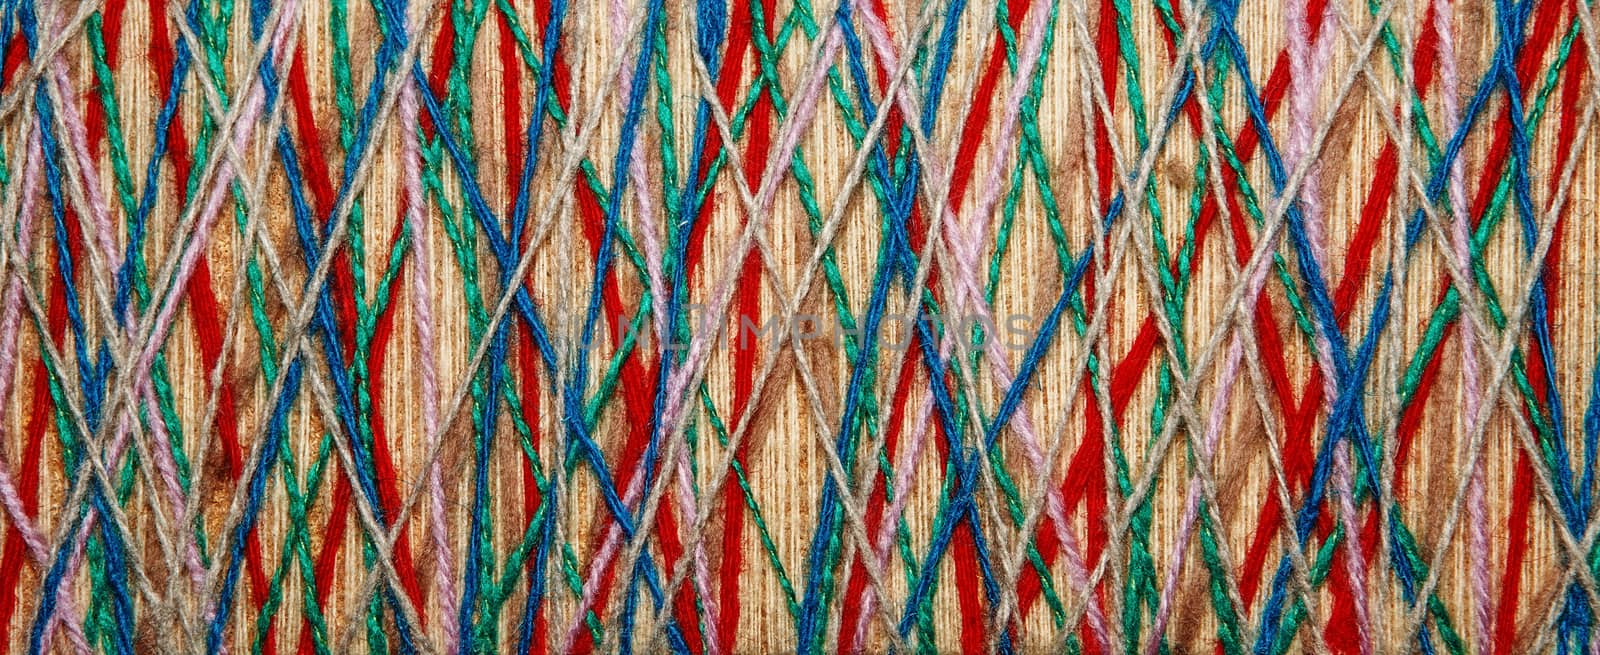 The multicolored yarn used for decor. Cobweb from threads